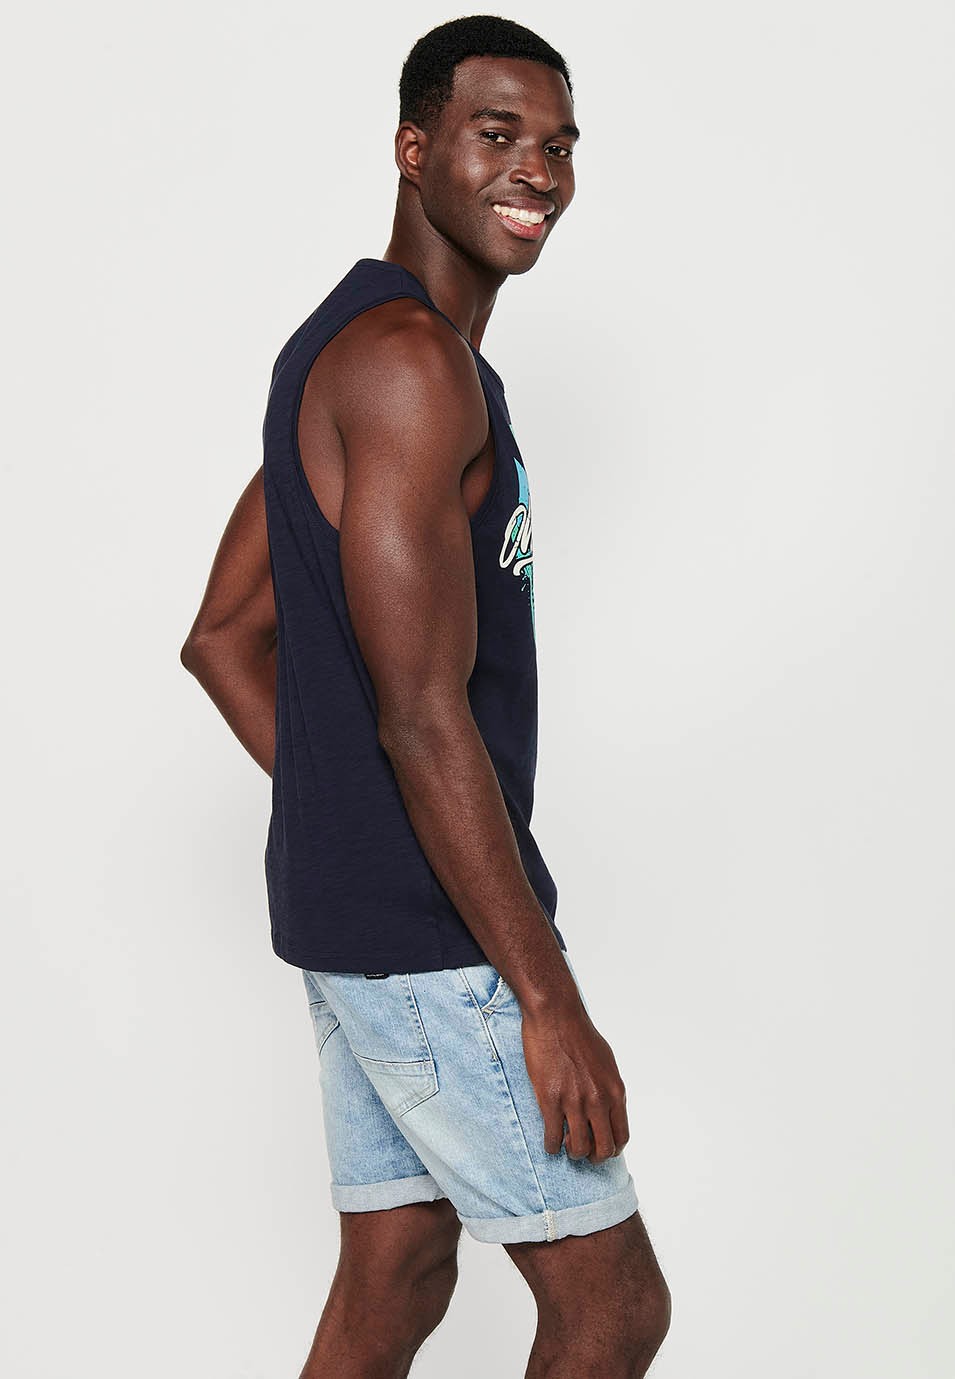 Tank top, round neck, navy front print for men